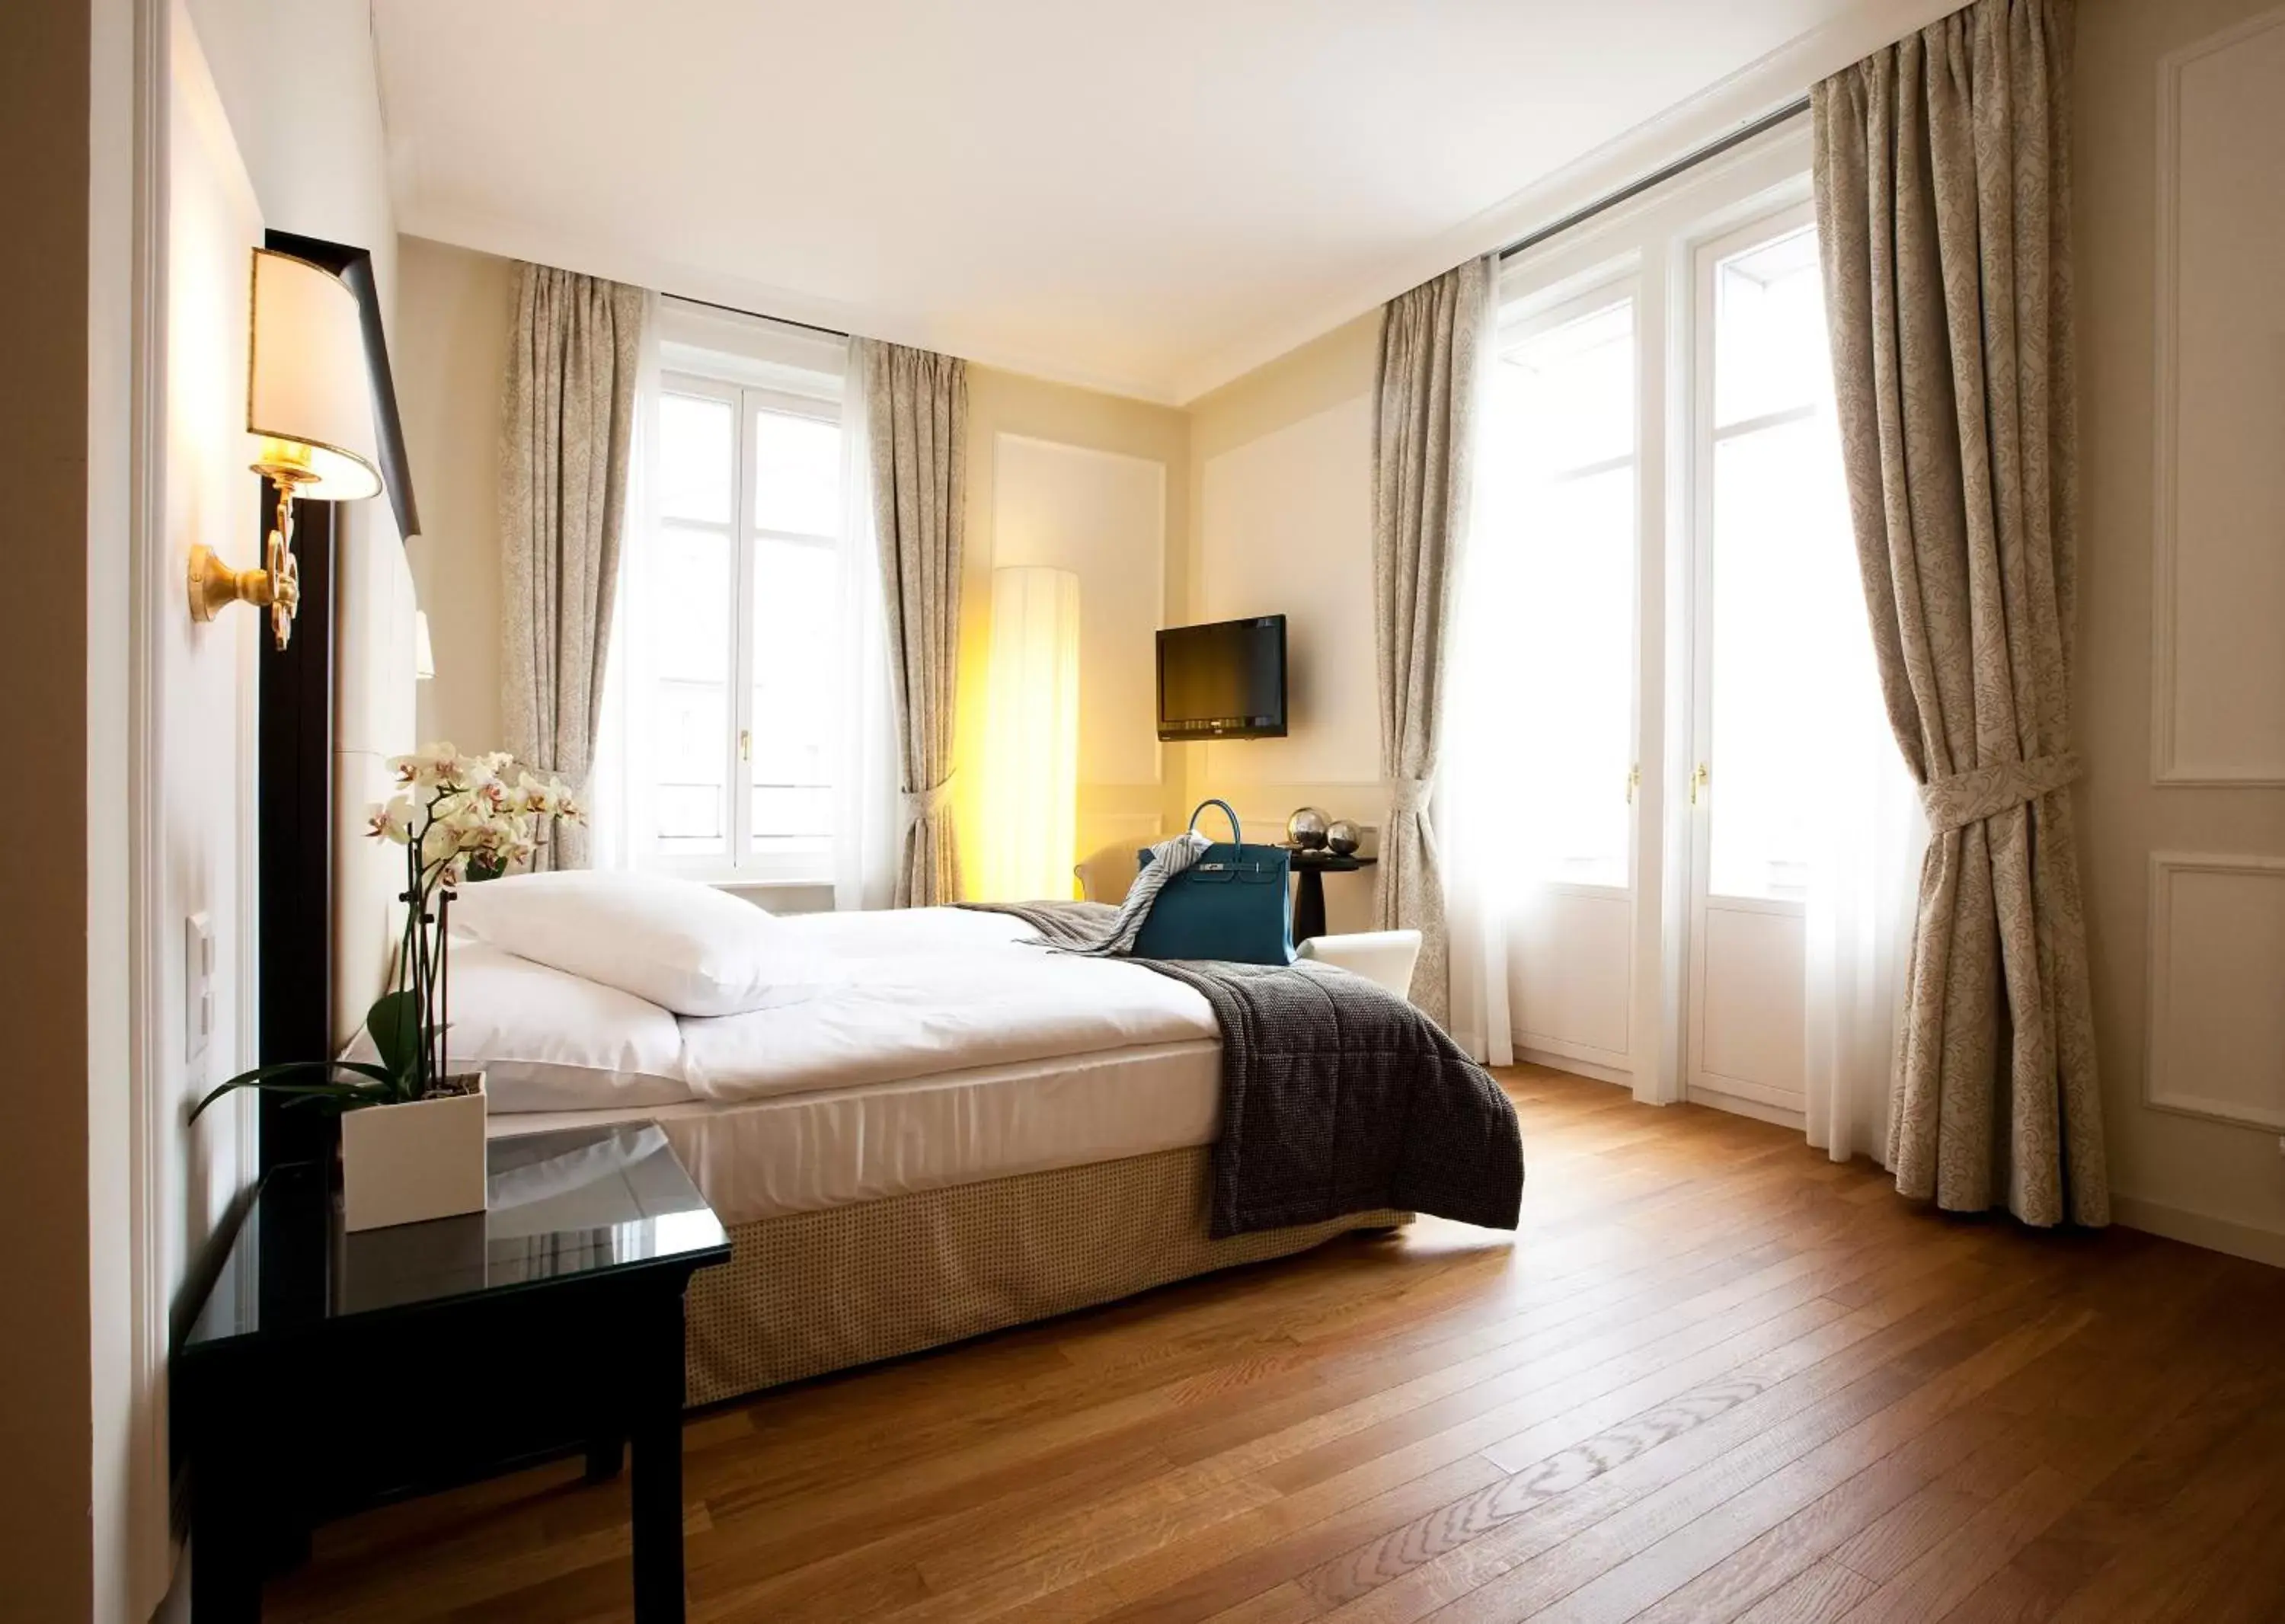 Deluxe Double Room in Château d'Ouchy